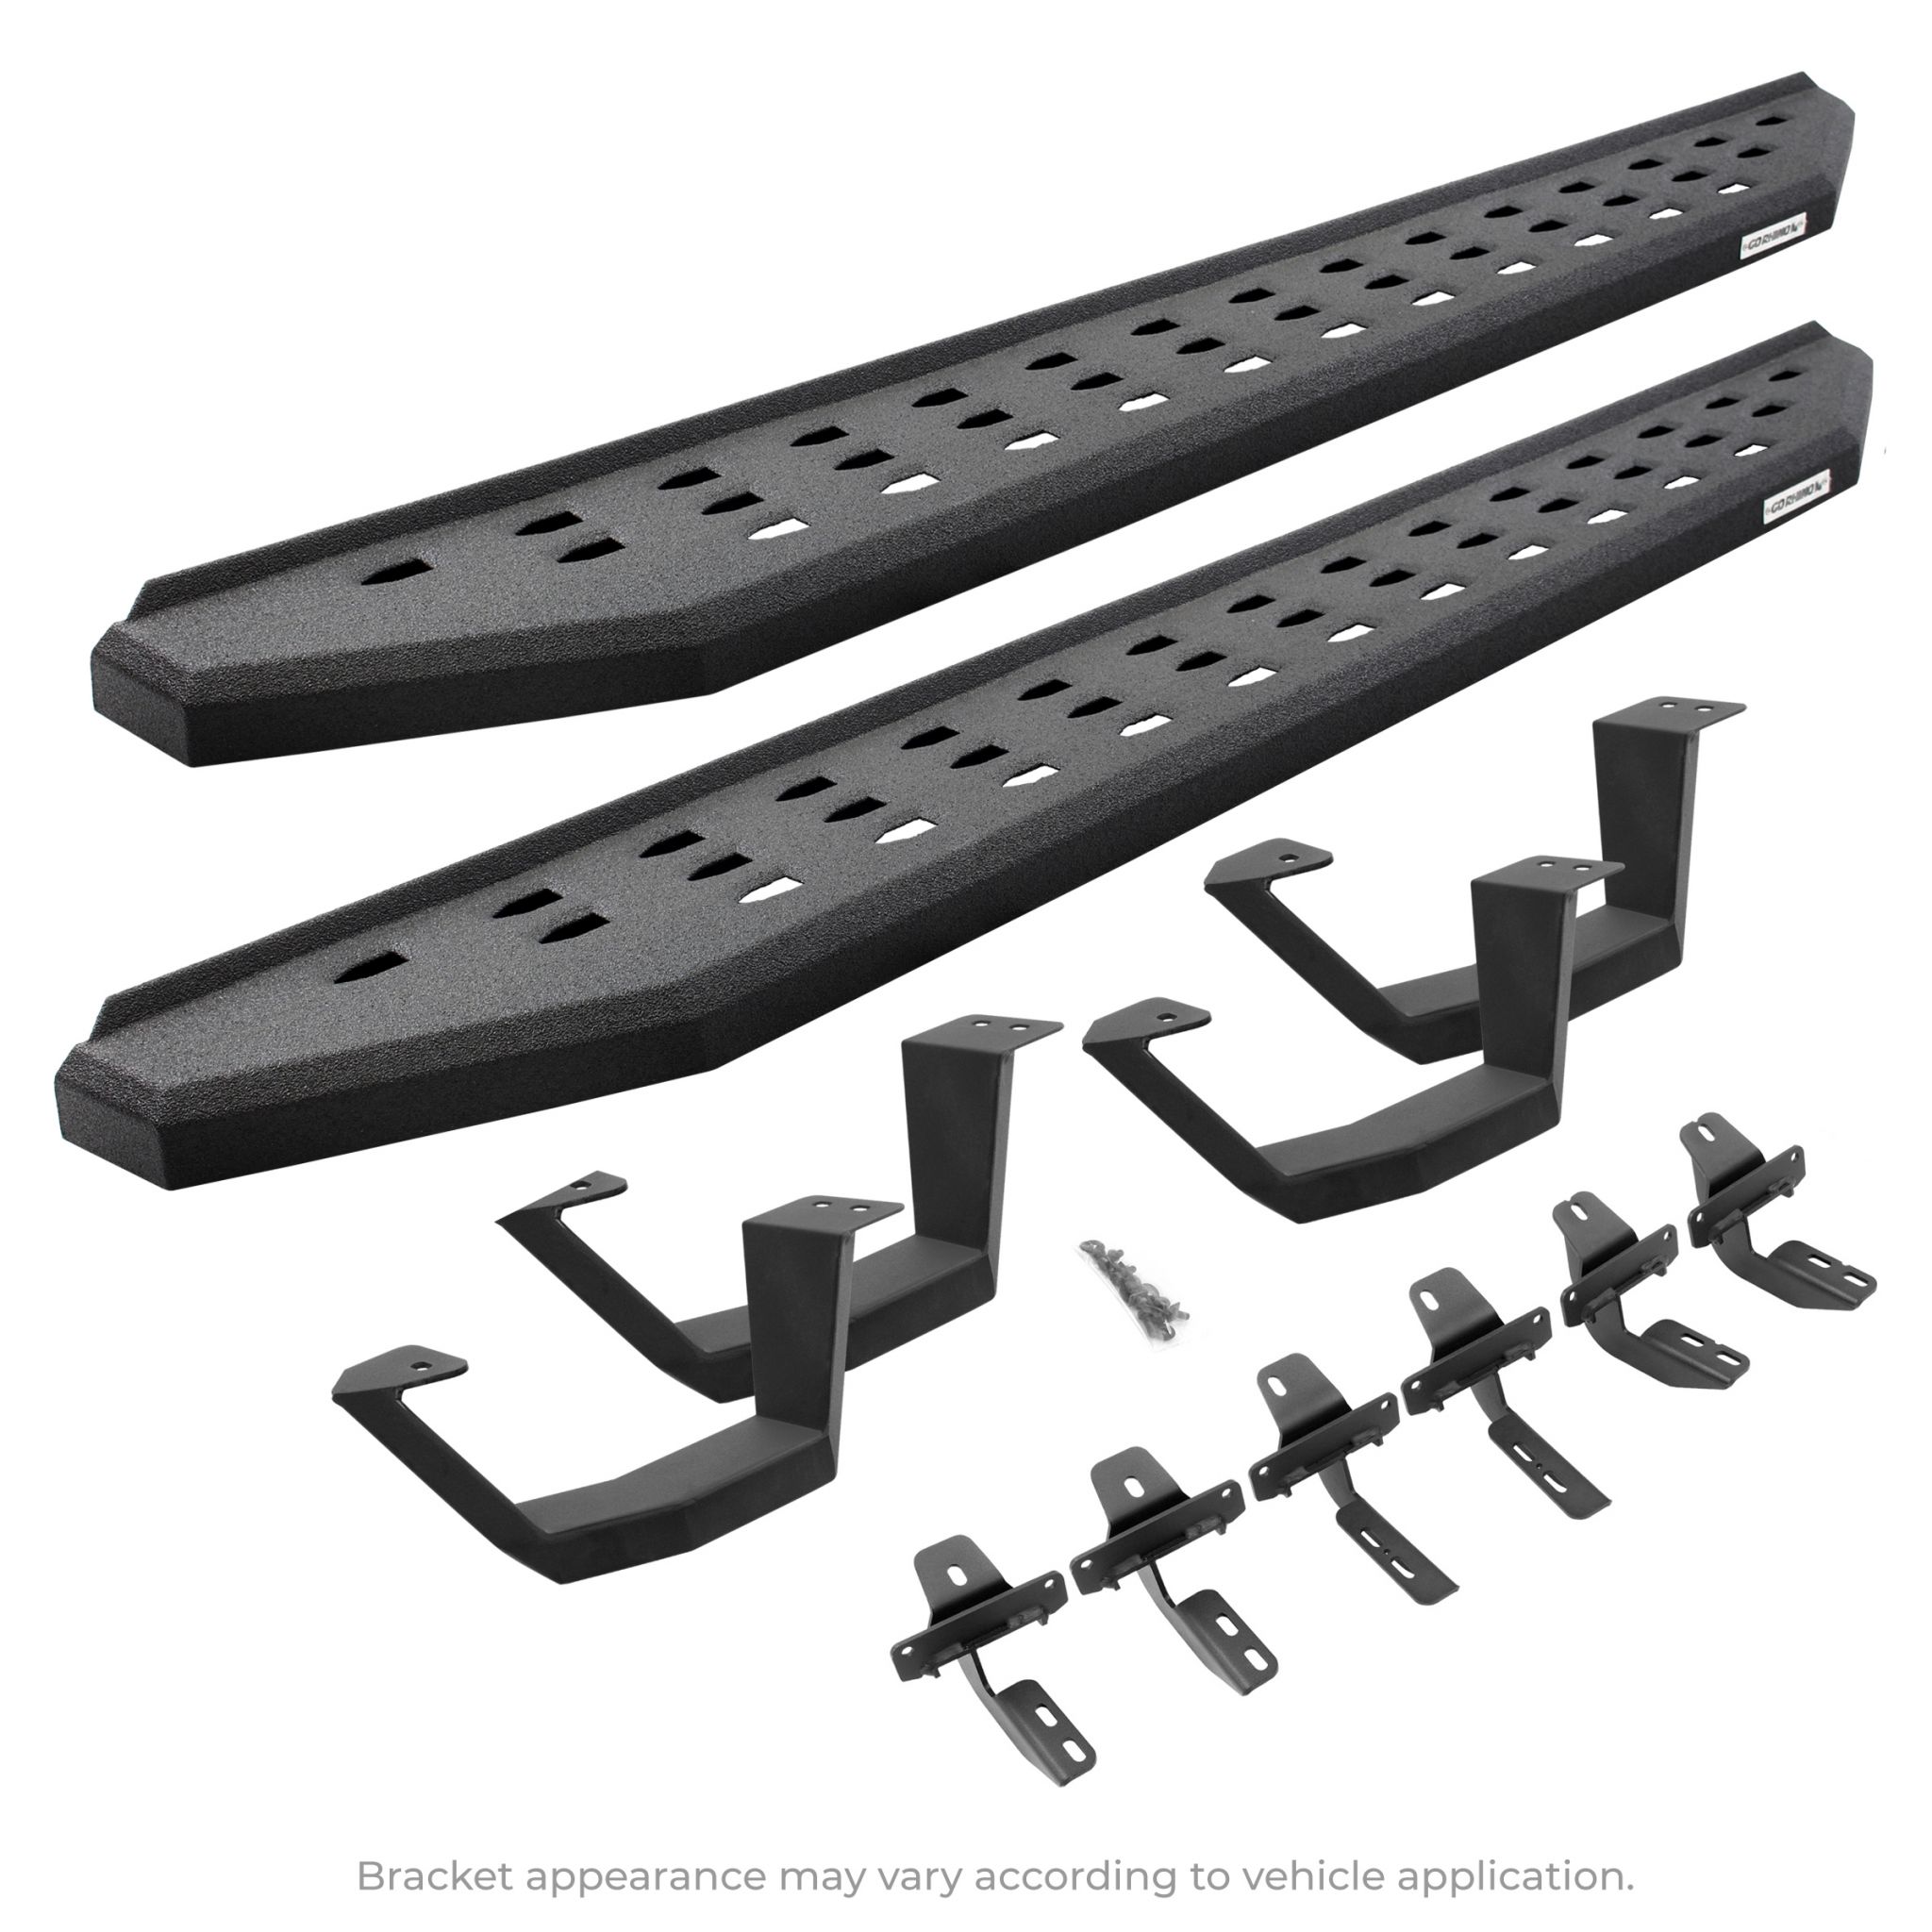 Go Rhino - 6940478720T - RB20 Running Boards With Mounting Brackets & 2 Pairs of Drop Steps Kit - Protective Bedliner Coating